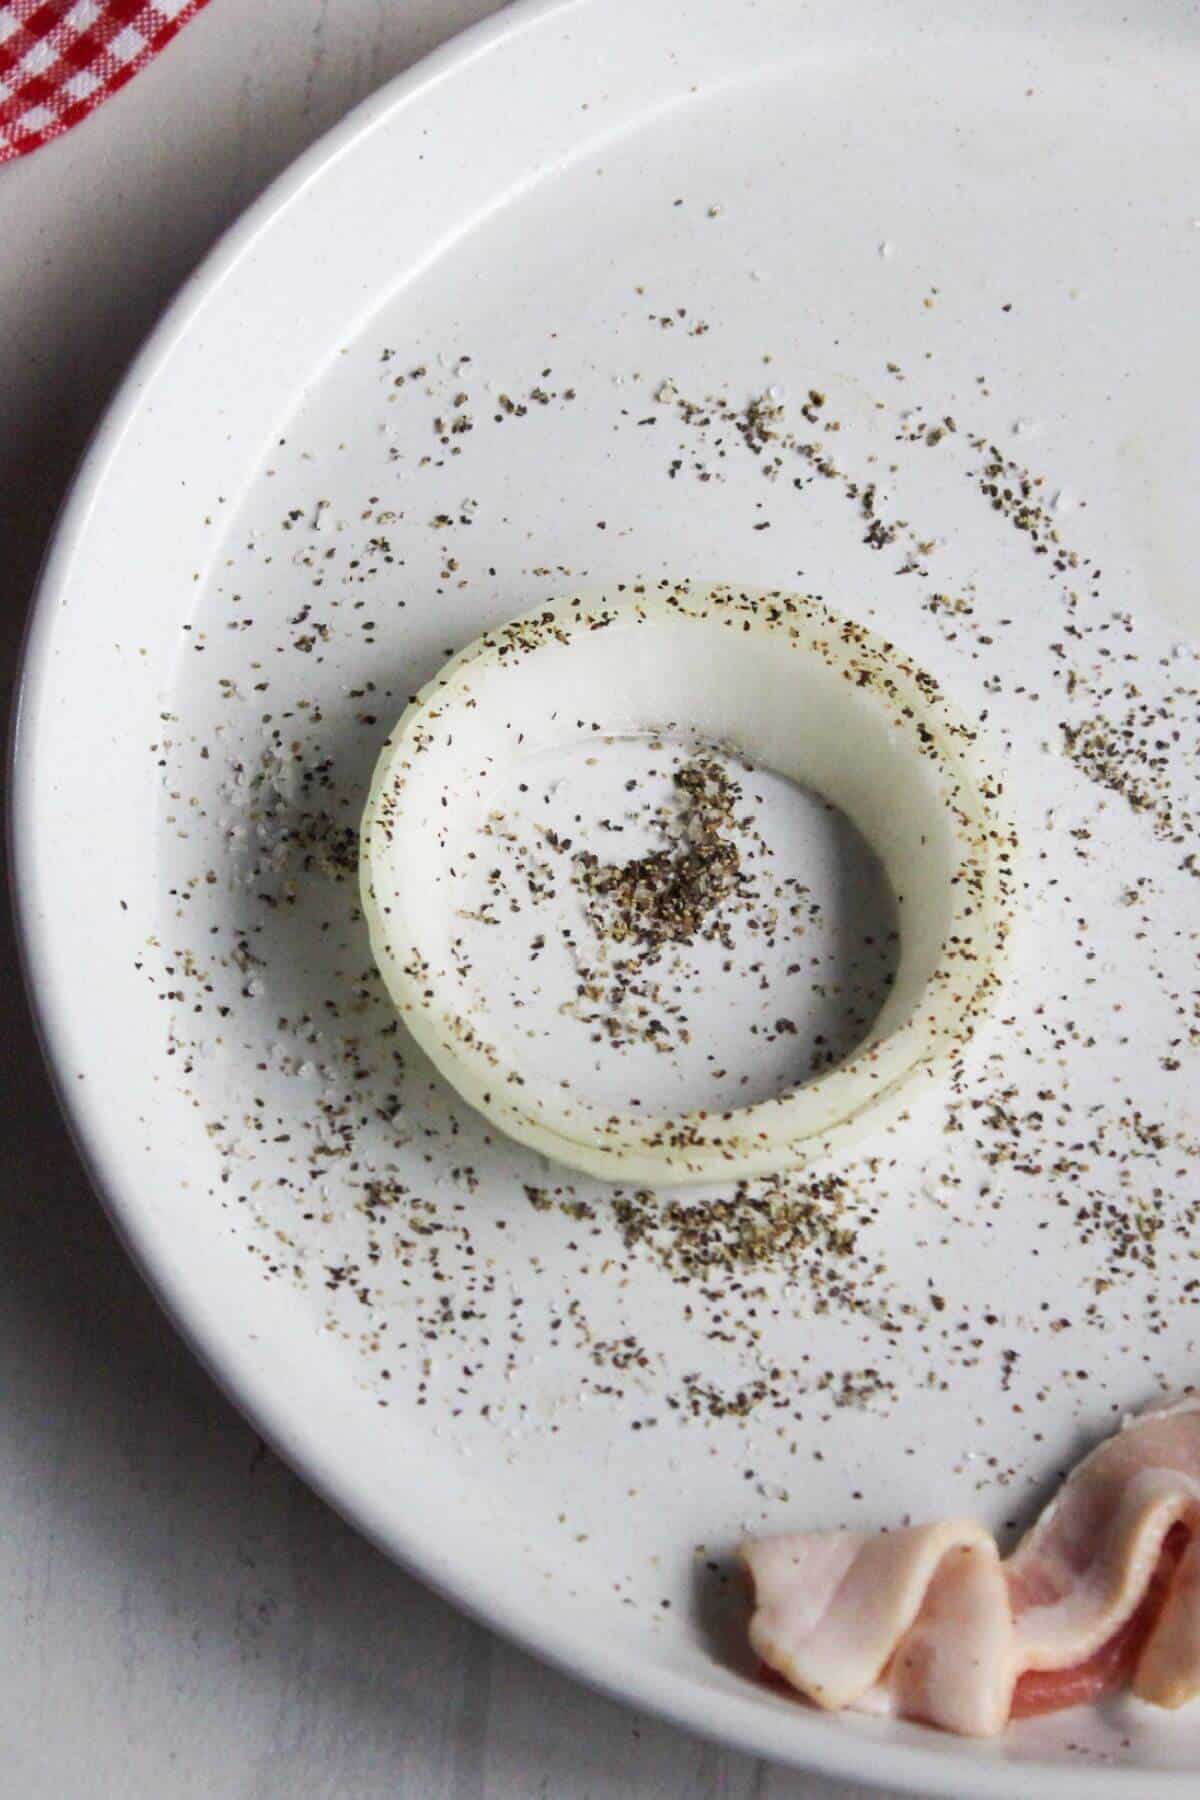 Salt and pepper sprinkled onto ring of onion.